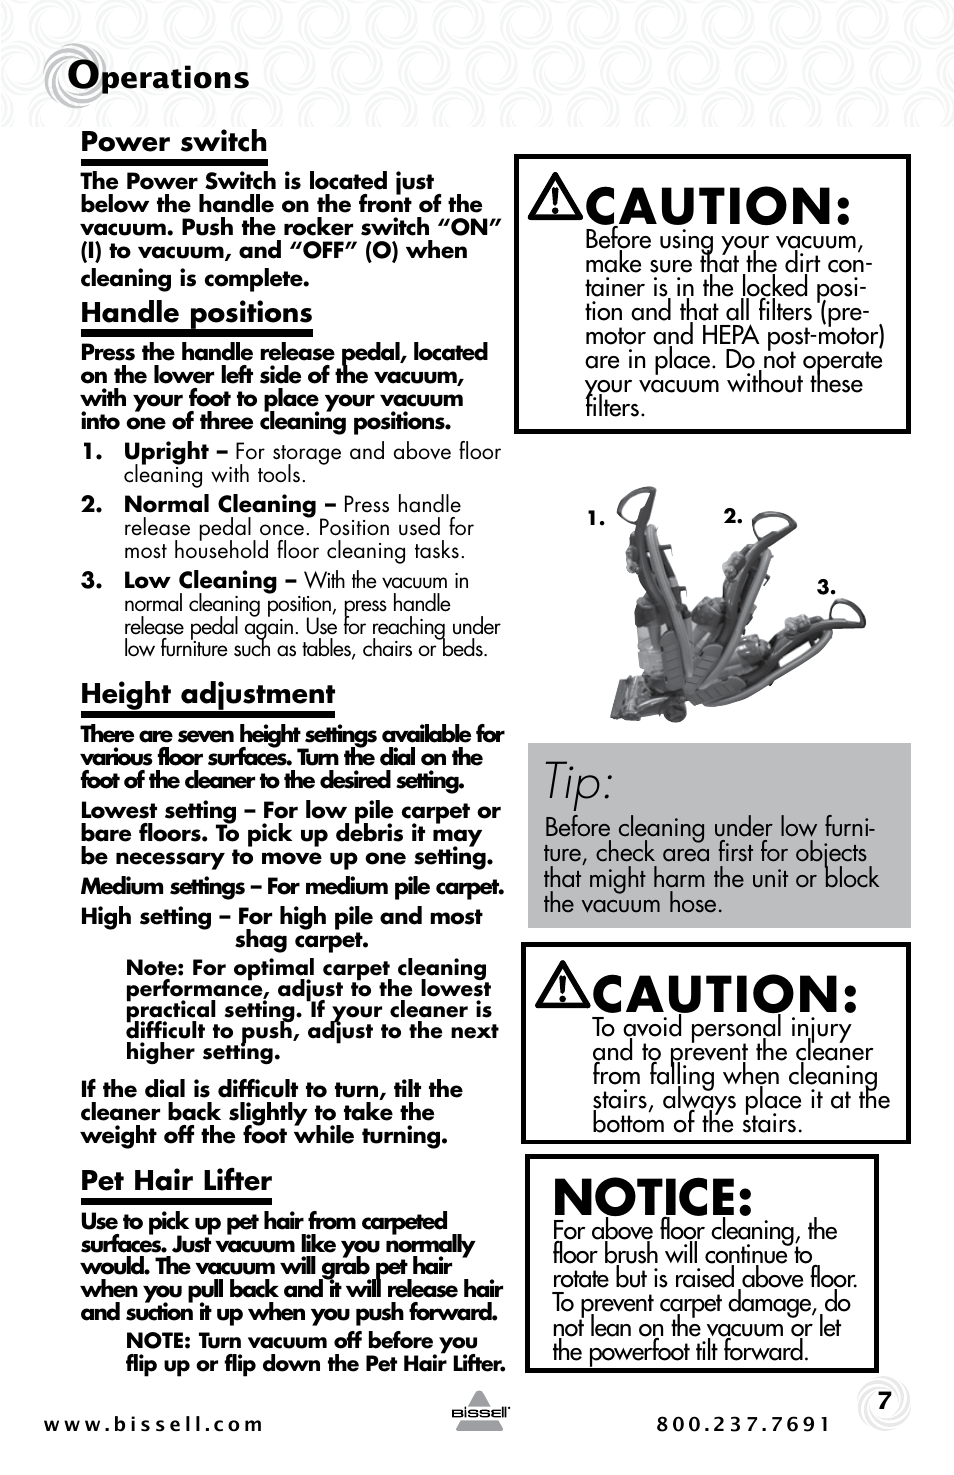 Notice, Caution, Perations | Bissell PET HAIR ERASER 3920 User Manual | Page 7 / 20